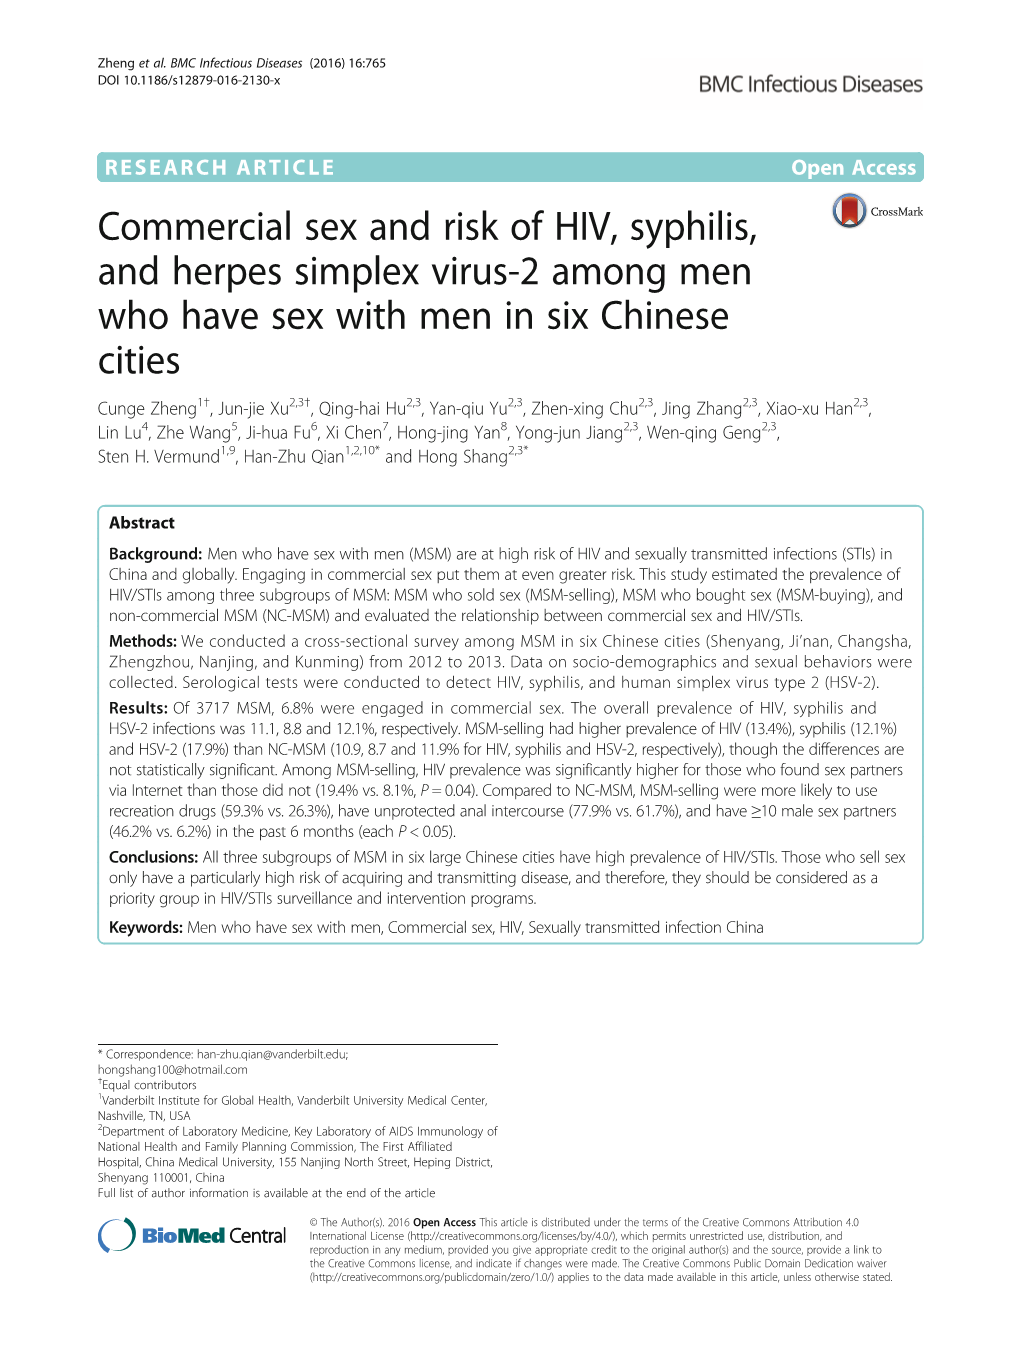 Commercial Sex and Risk of HIV, Syphilis, and Herpes Simplex Virus-2